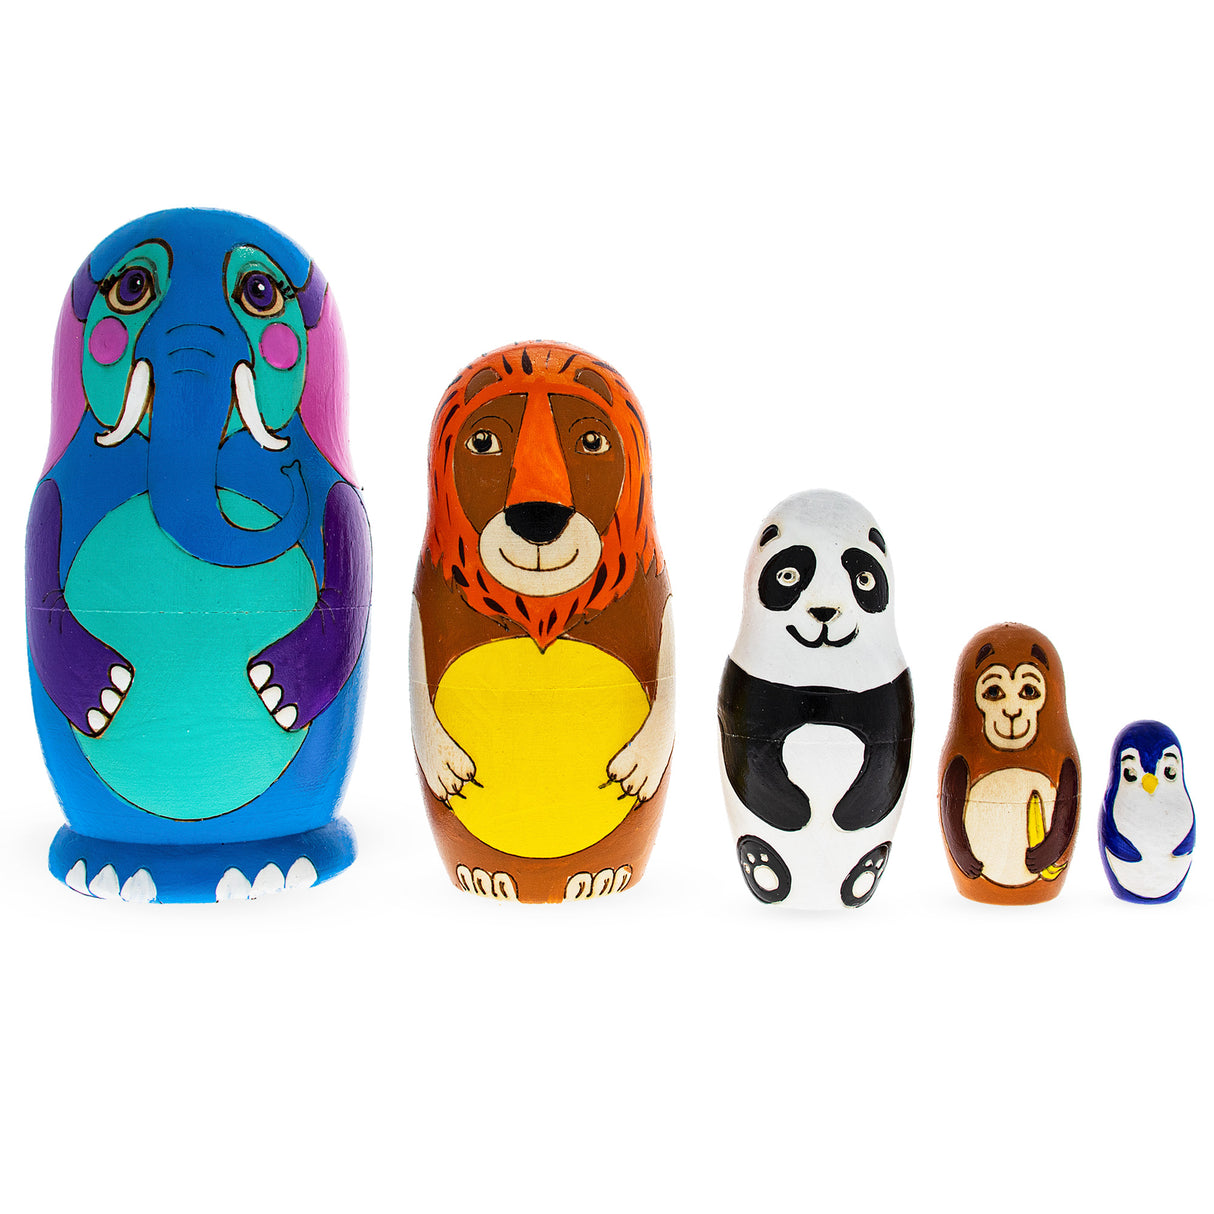 Wood Set of 5 Zoo Animals Wooden Nesting Dolls in Multi color